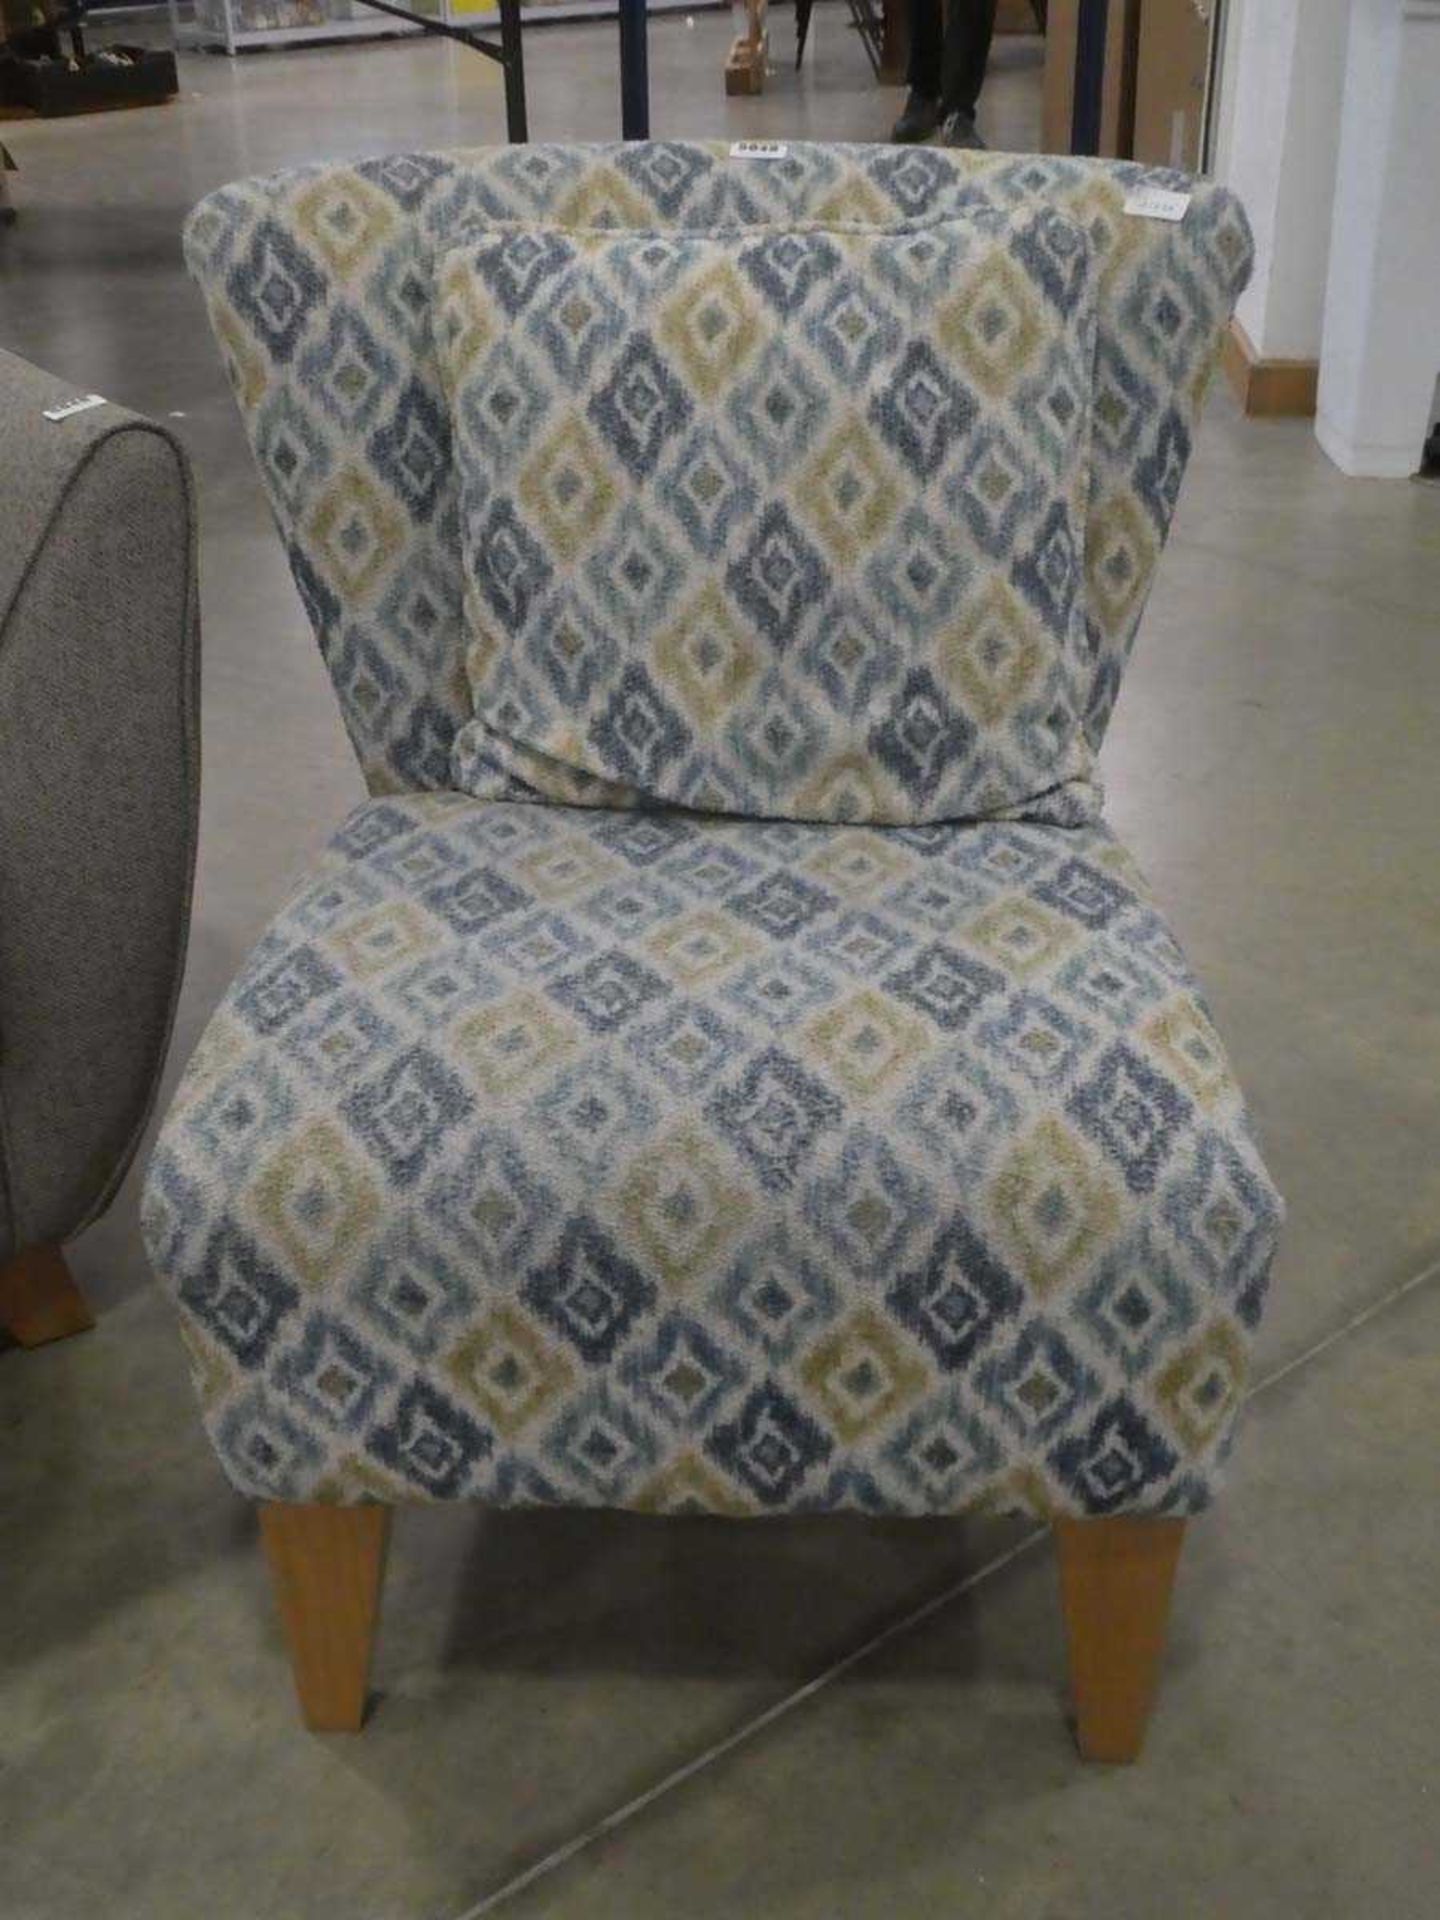 (5) George Cocktail diamond patterned easy chair